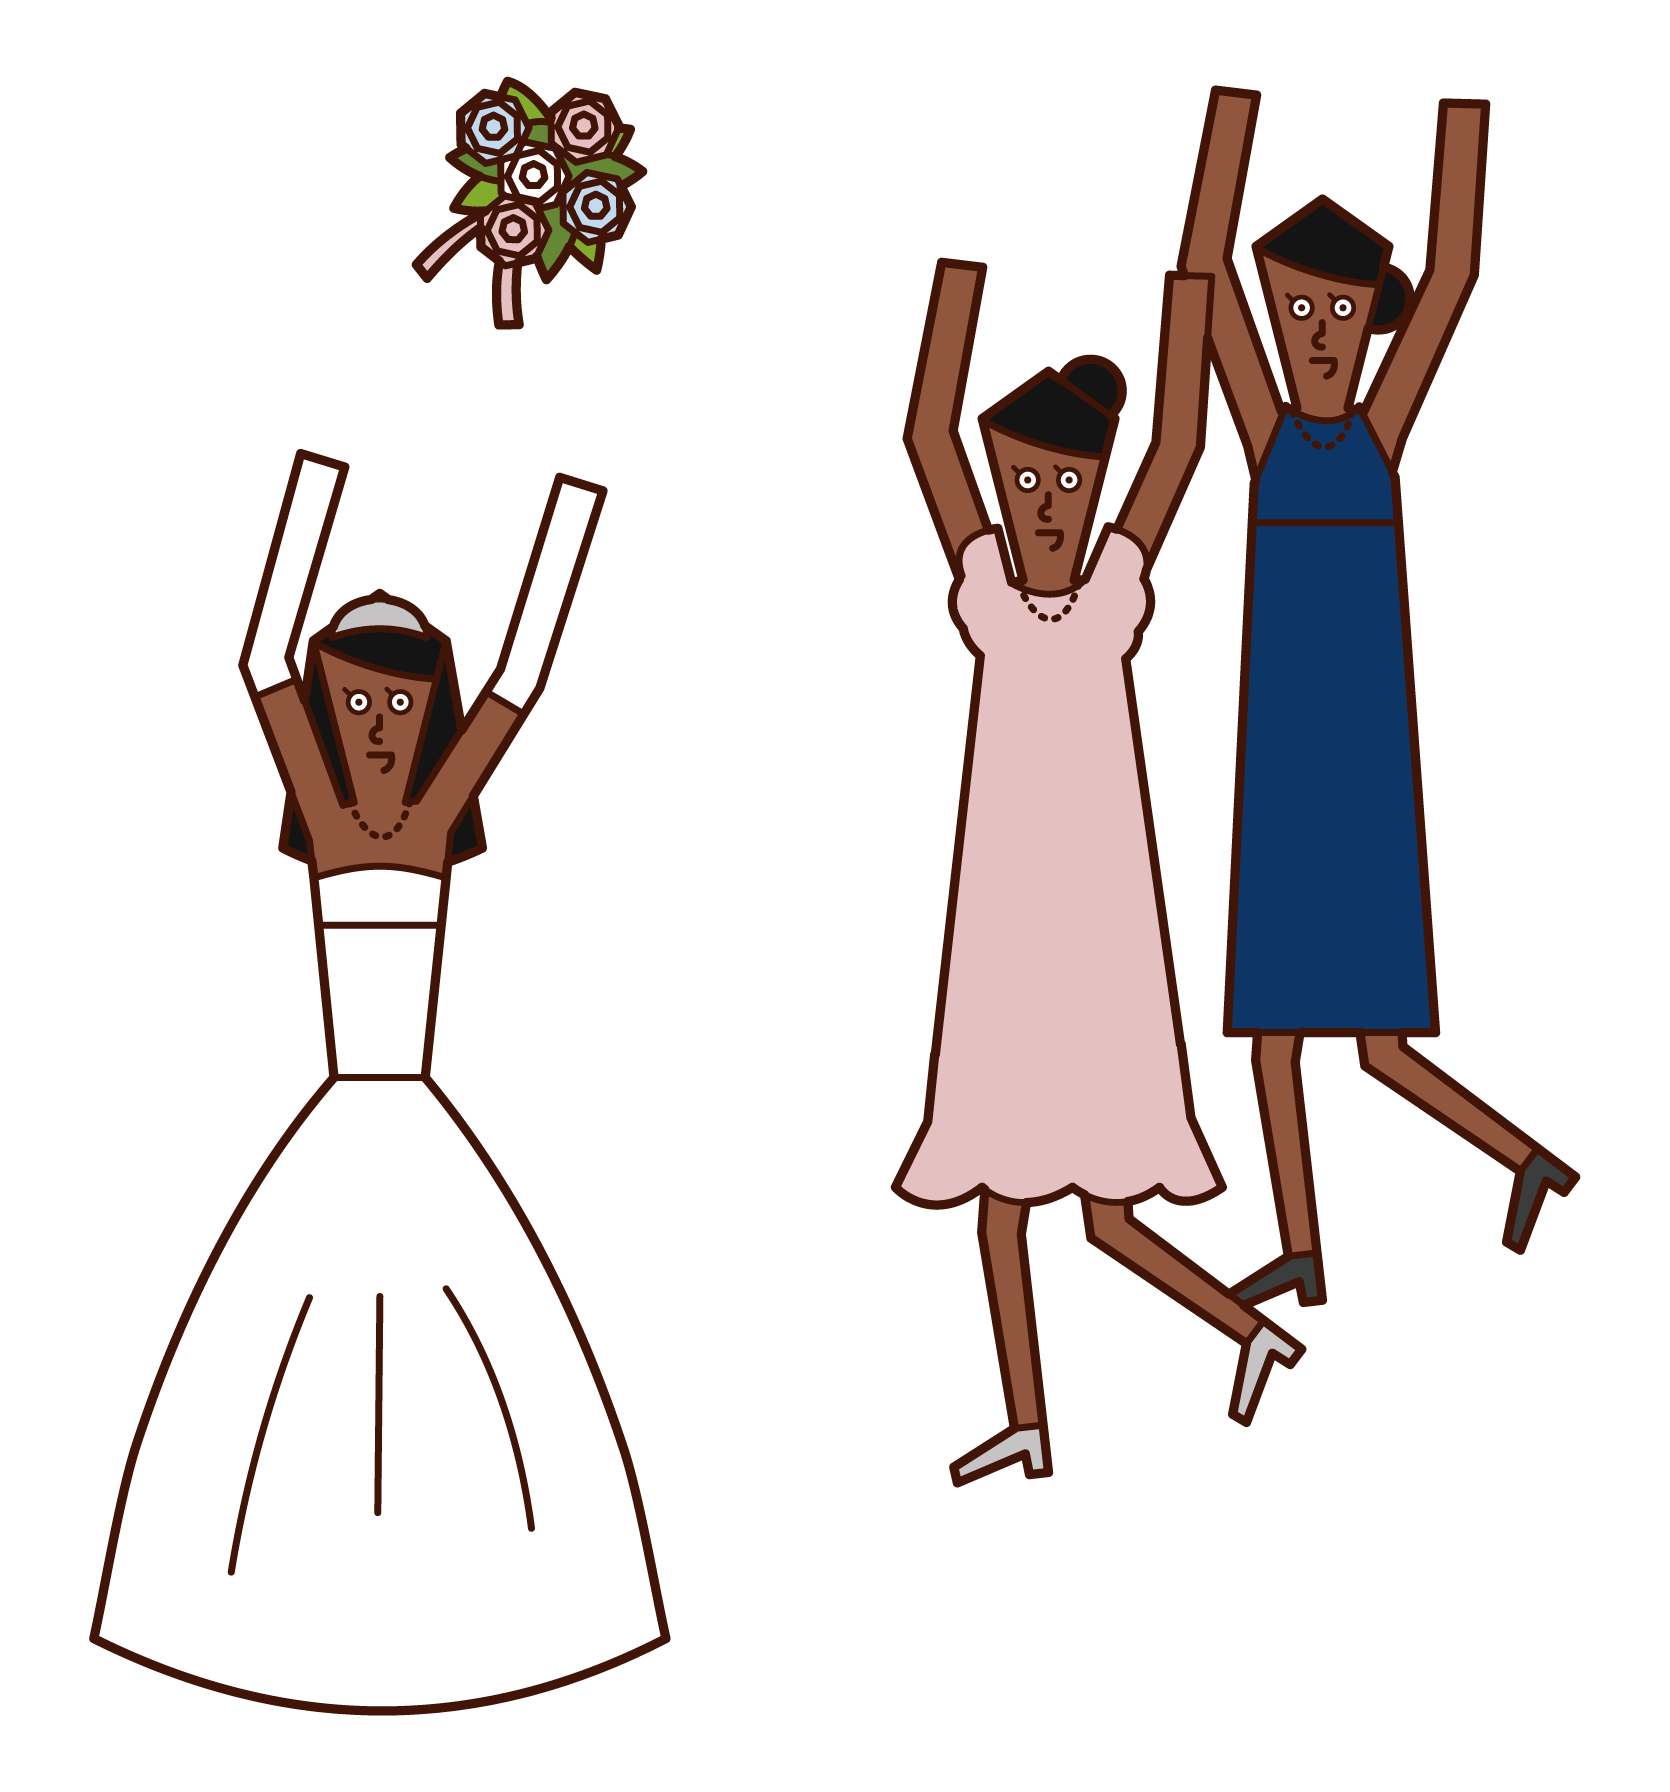 Illustration of a bouquettos person (woman)